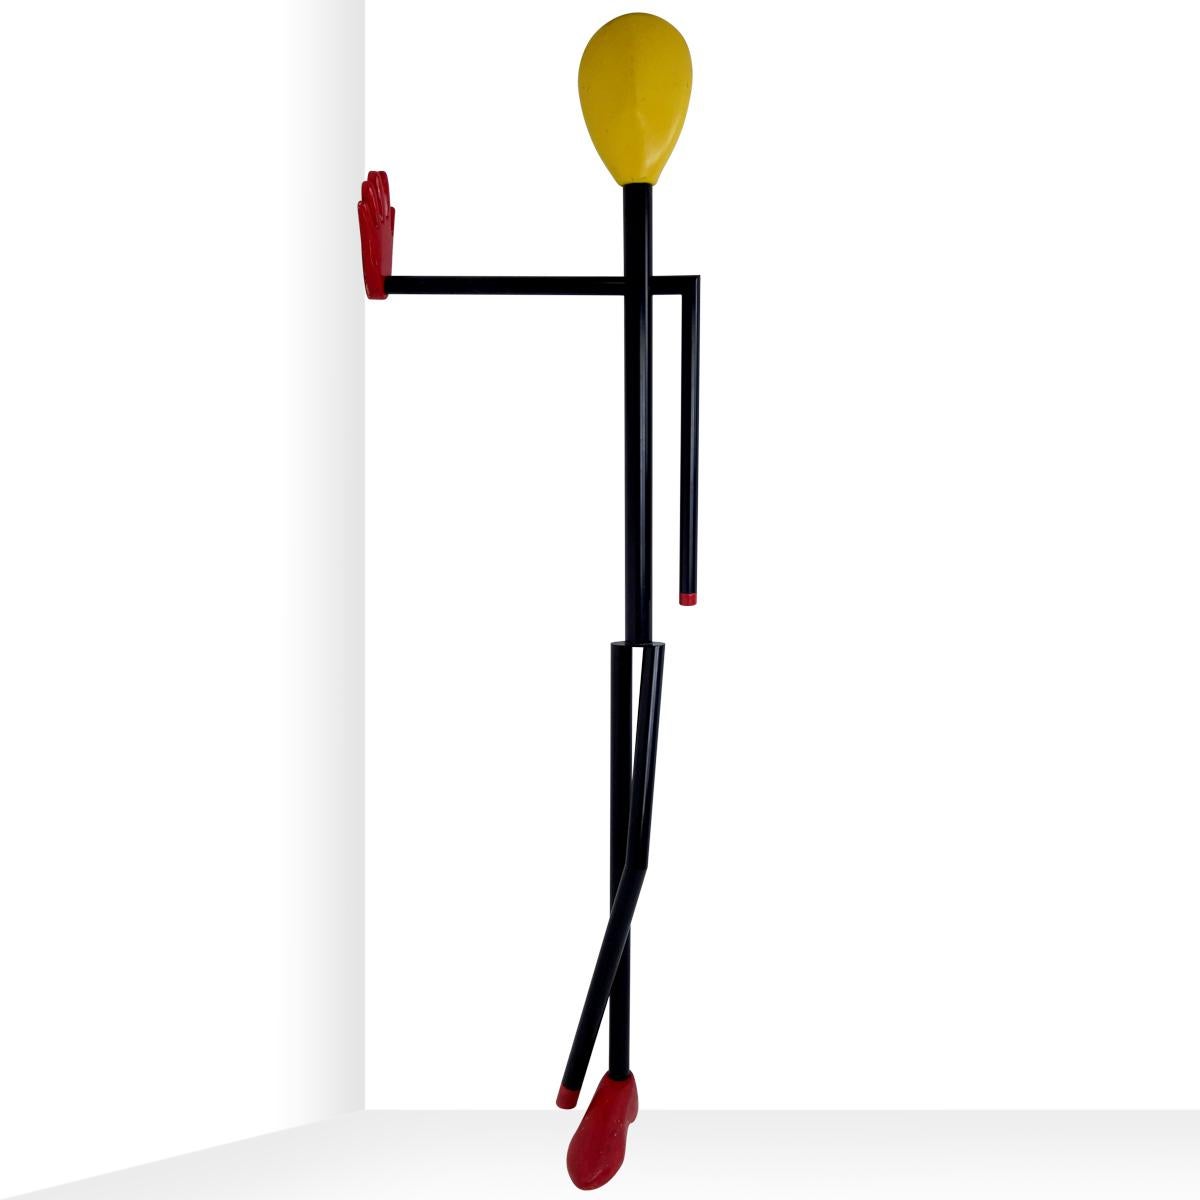 This playful Postmodern coat stand is not only a smart space saver in a hallway, pantry or dressing room, it is also a pleasant and cheerful interior element to look at.
The black steel frame leans against the wall casually. There is a possibility